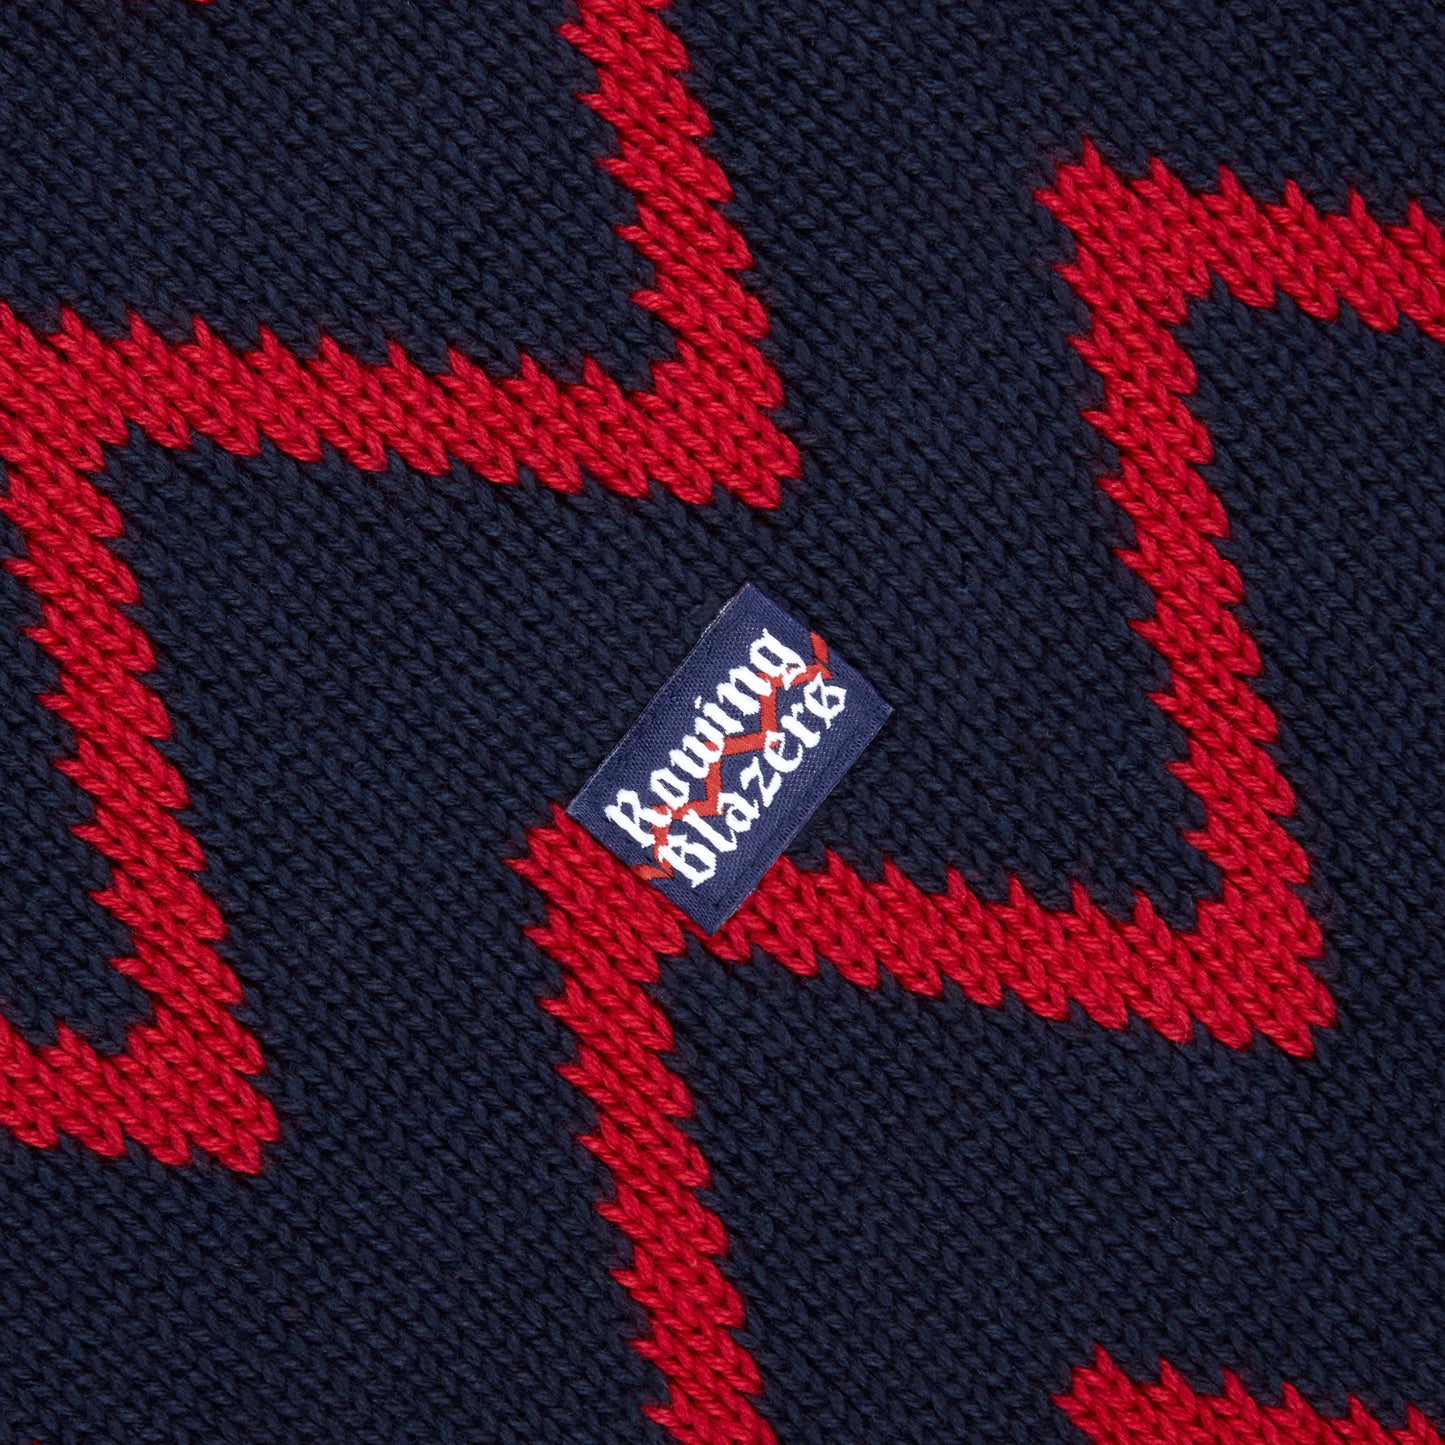 Navy and Red Zig-Zag Knitted Sweater